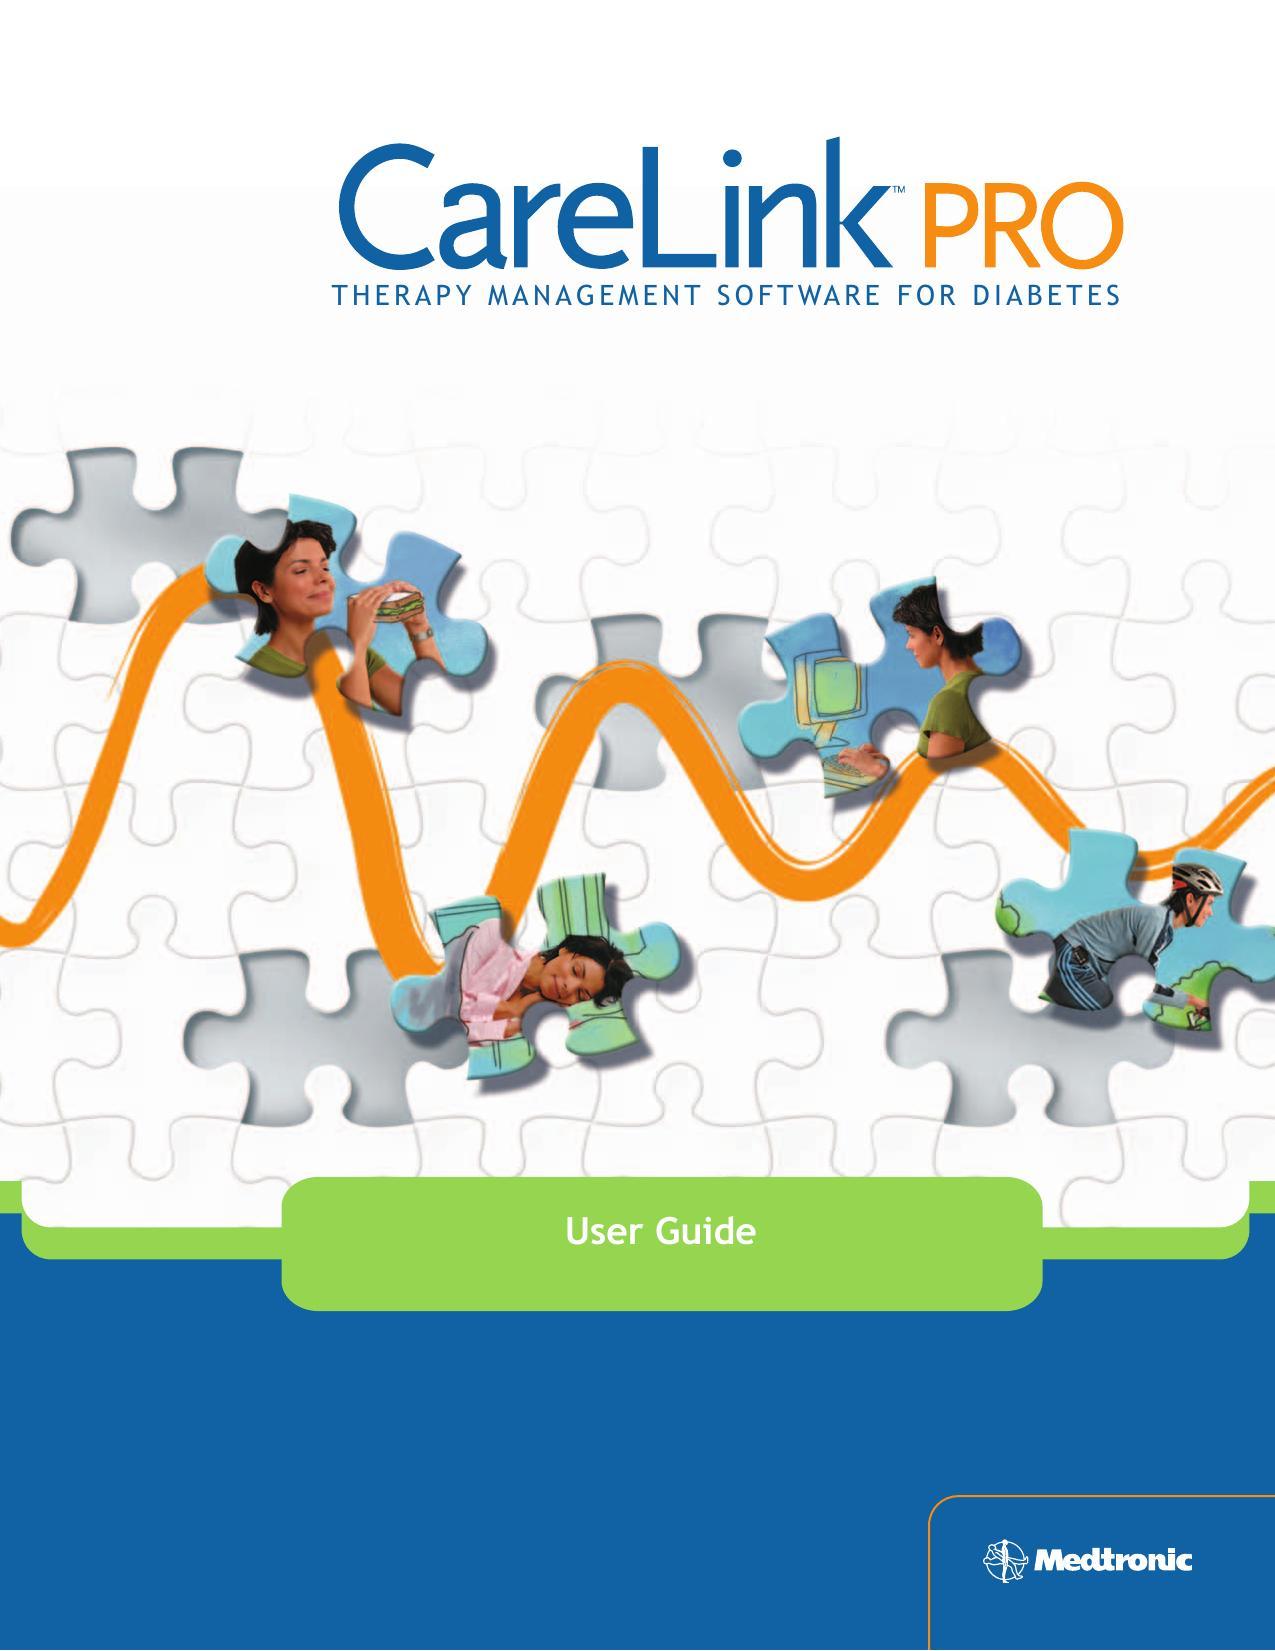 carelinkpro-therapy-management-software-for-diabetes-user-guide.pdf